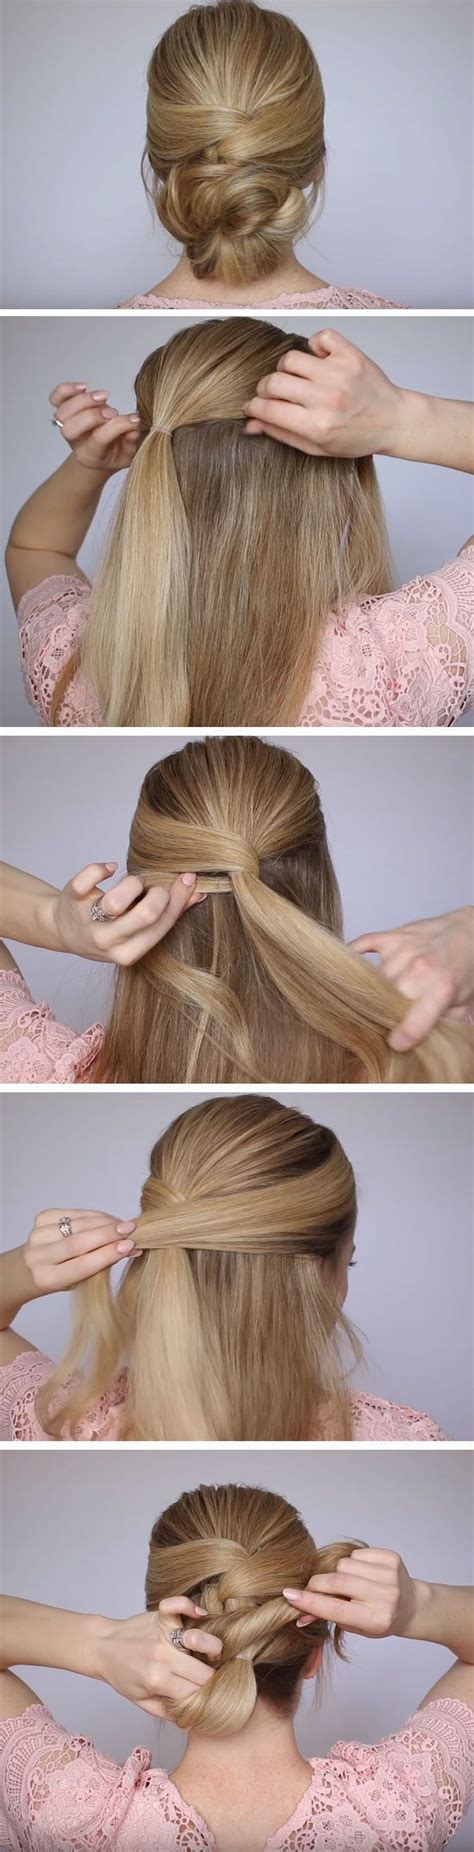 14 popular prom hairstyles for girls with medium length hair 40 Amazing Medium Hairstyles for 2017-2018 | Medium hair ...